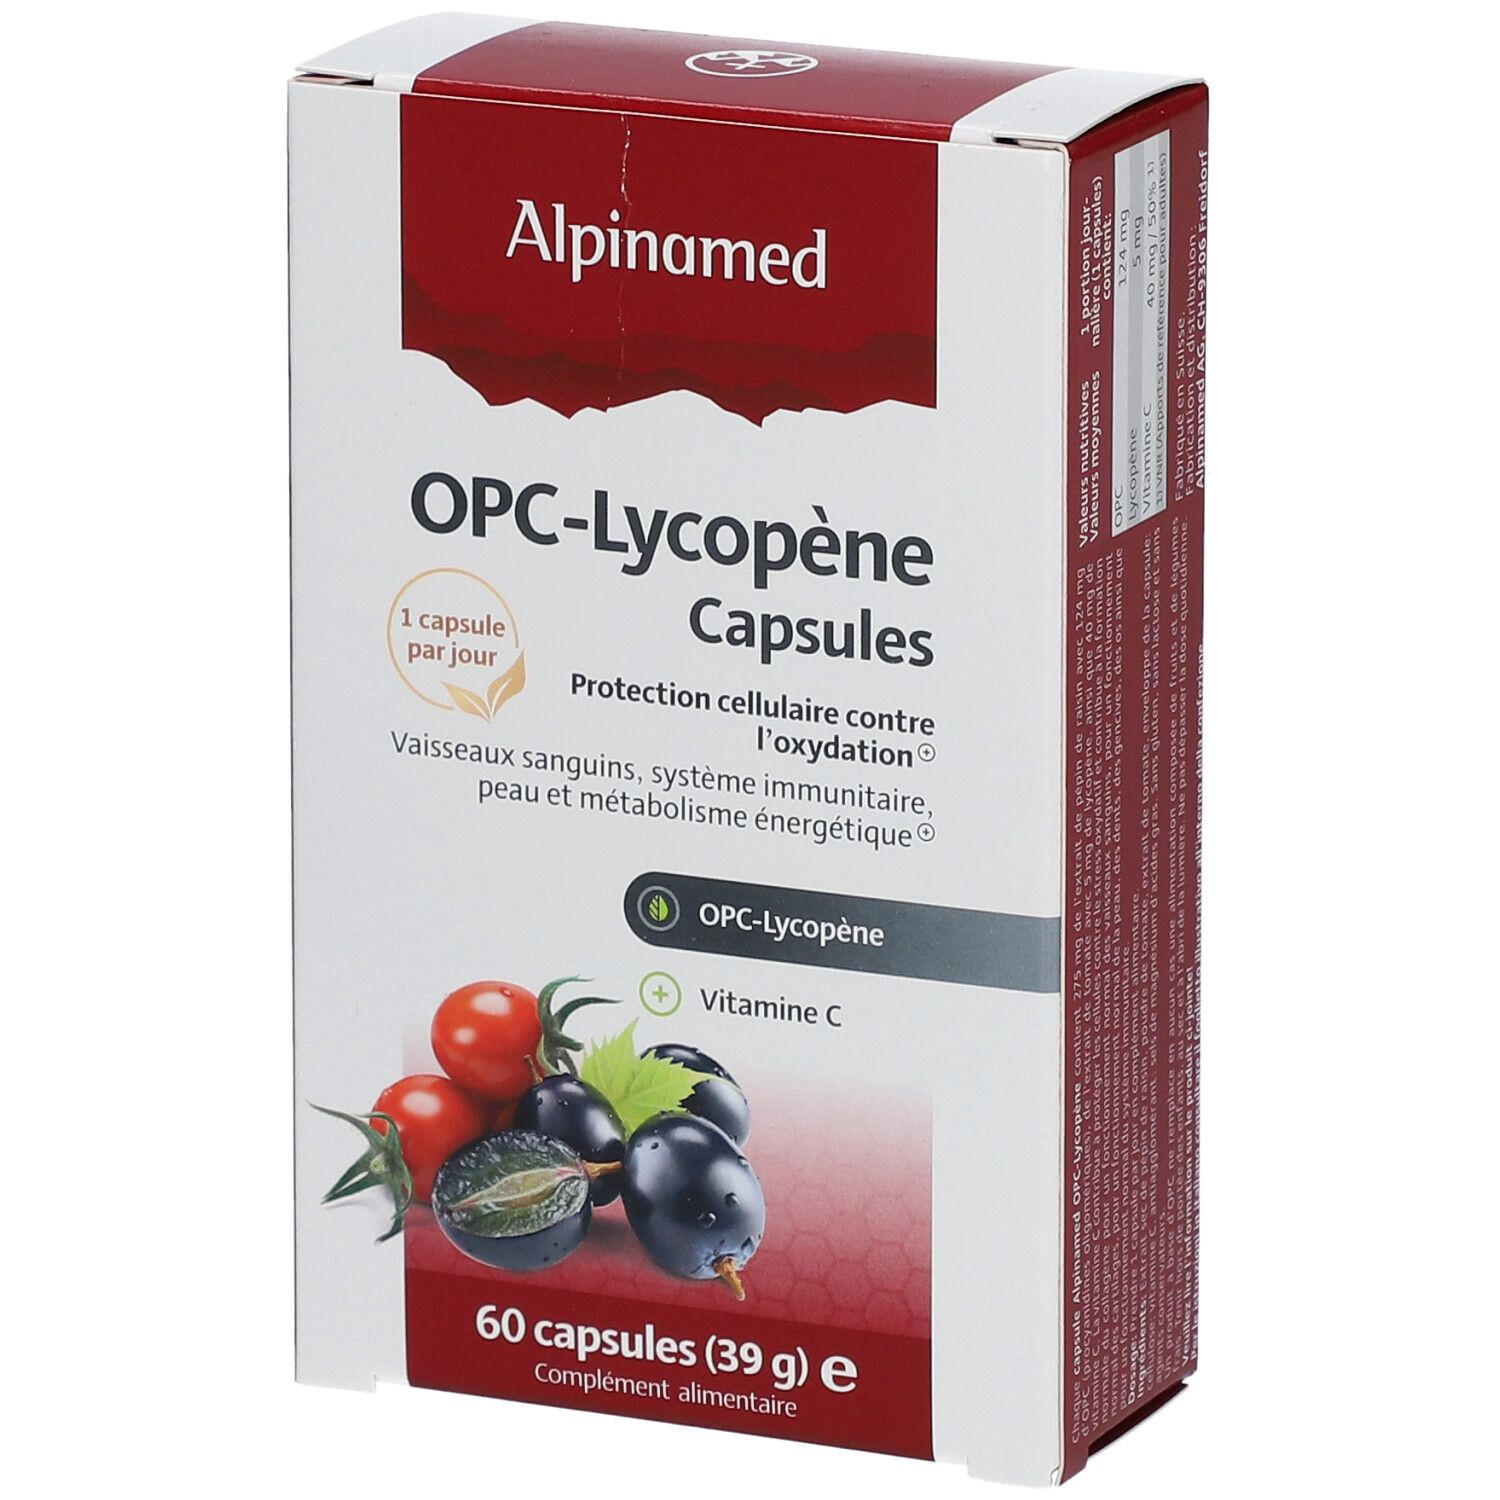 Alpinamed OPC-Lycopin